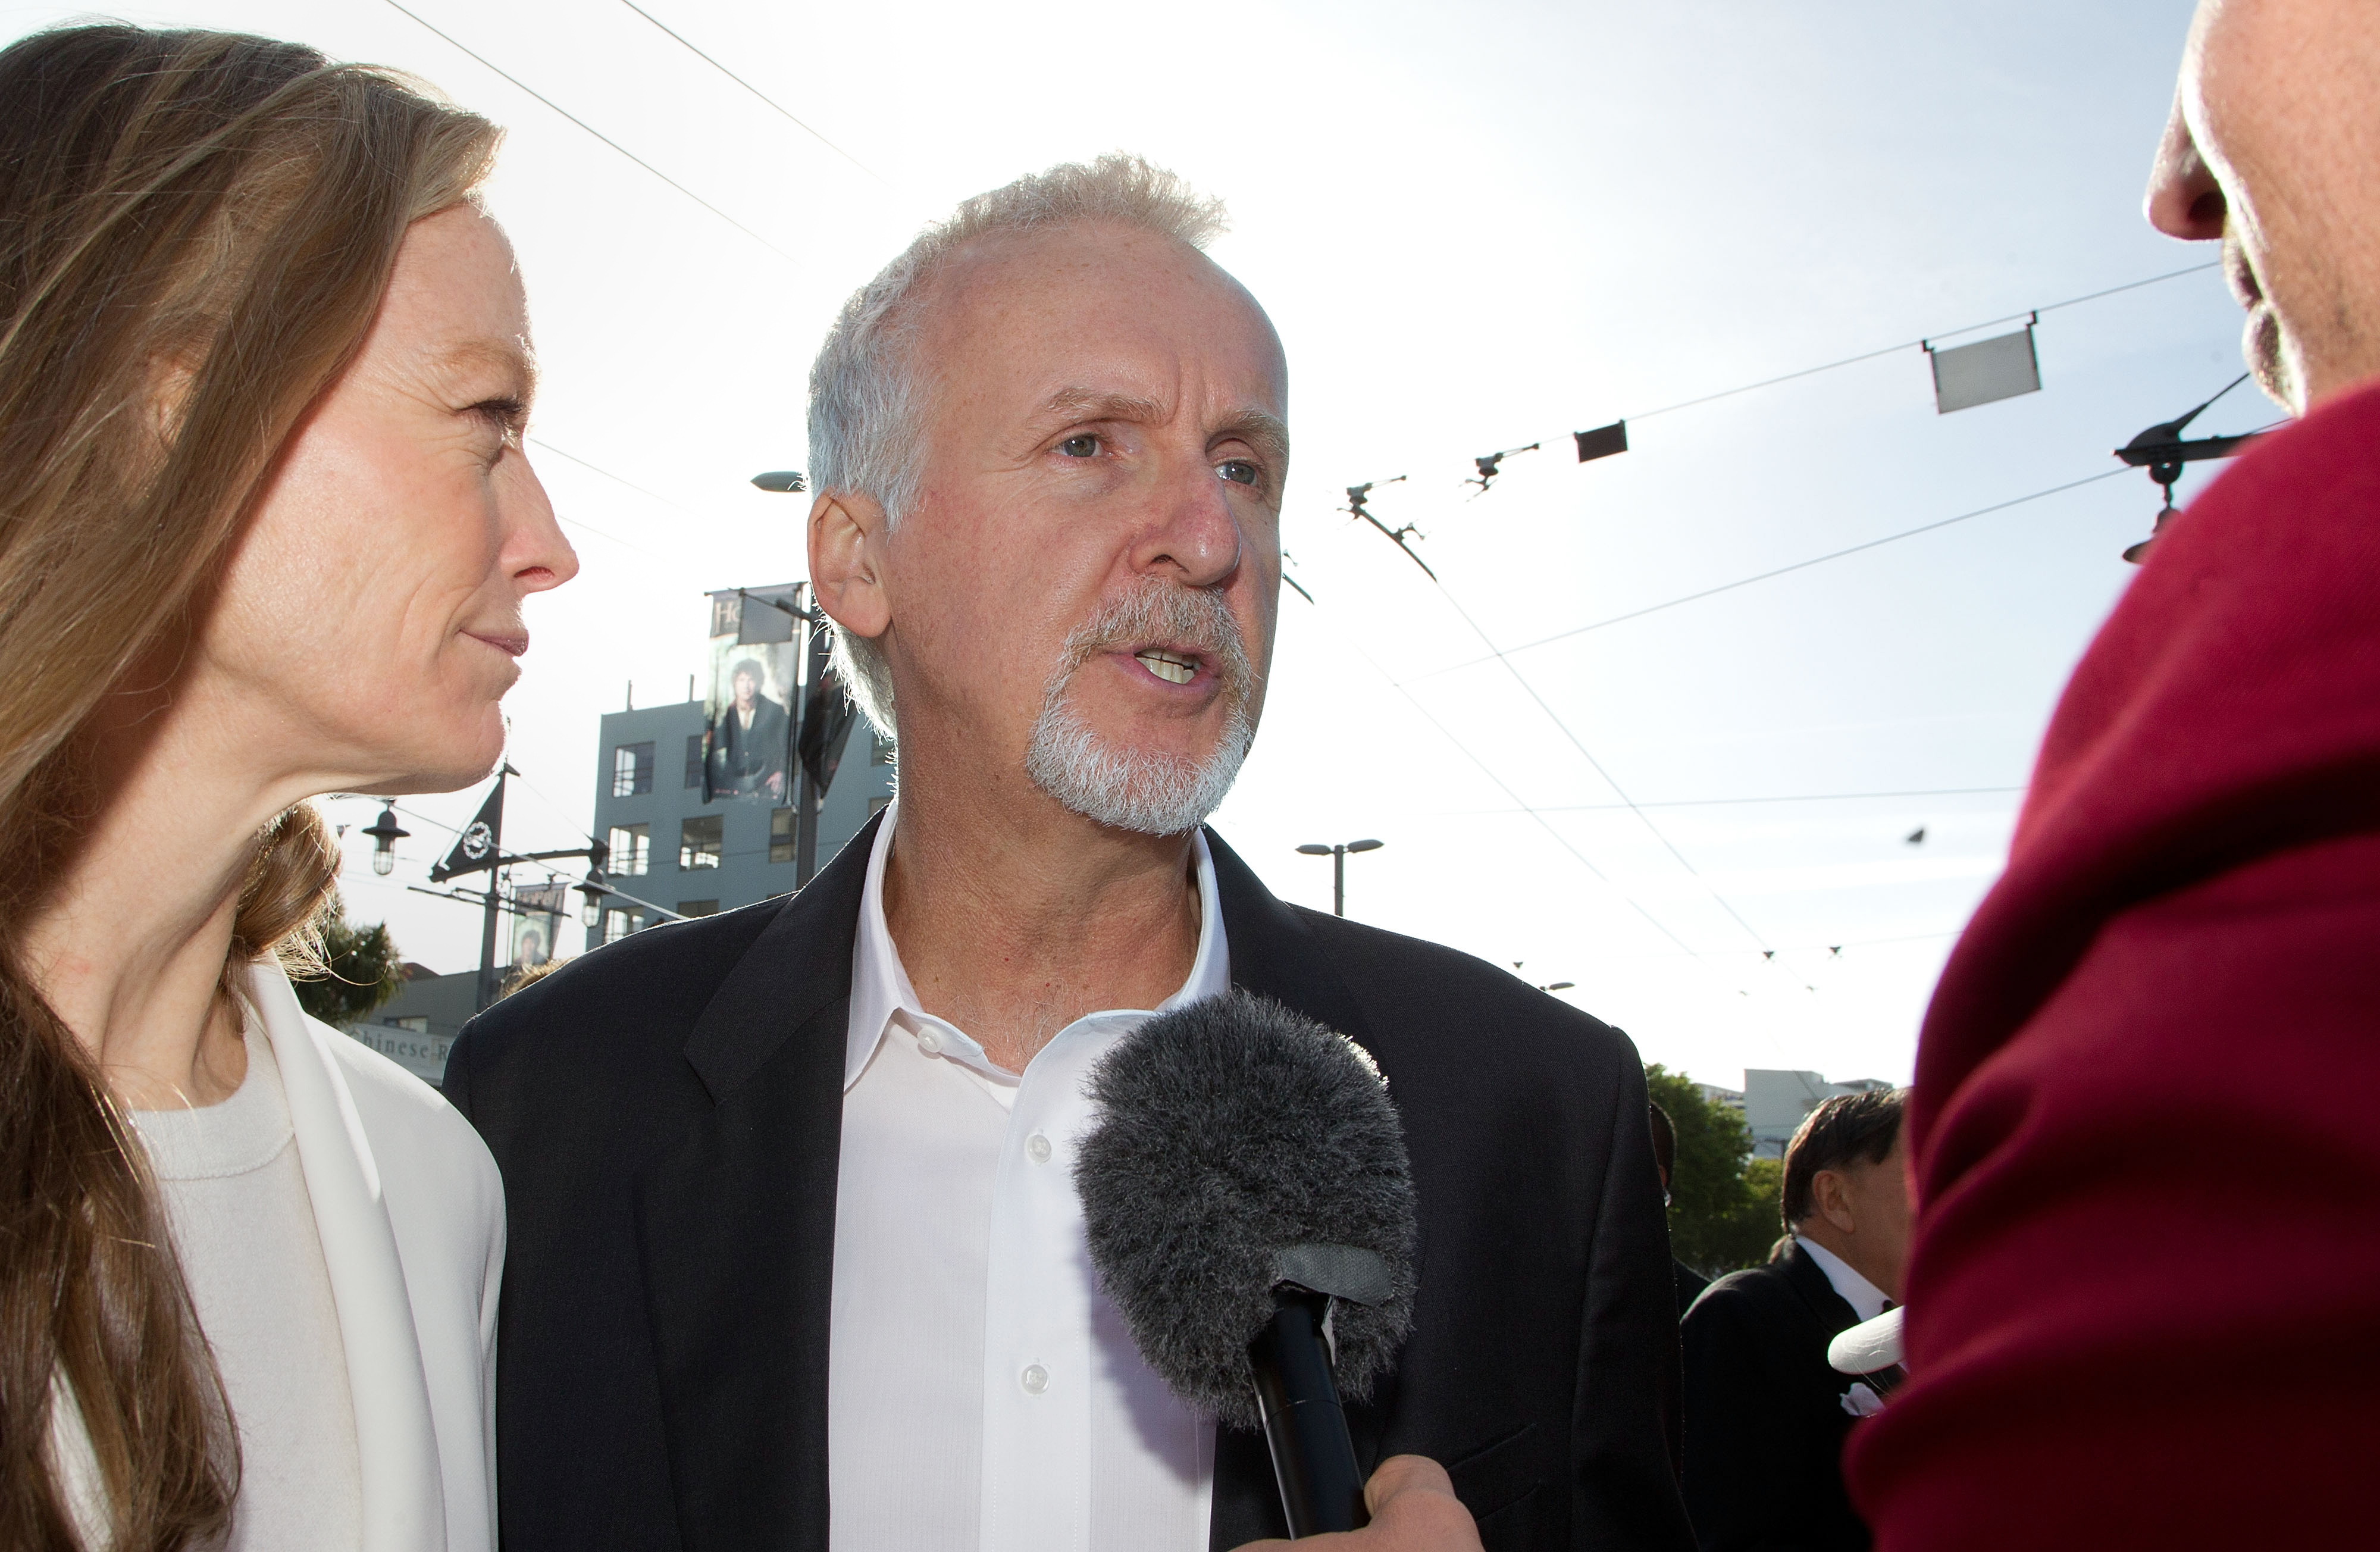 Director James Cameron (C) and Suzy Amis (L) at the world premiere of "The Hobbit" movie in Courtenay Place in Wellington, New Zealand on November 28, 2012. | Source: Getty Images